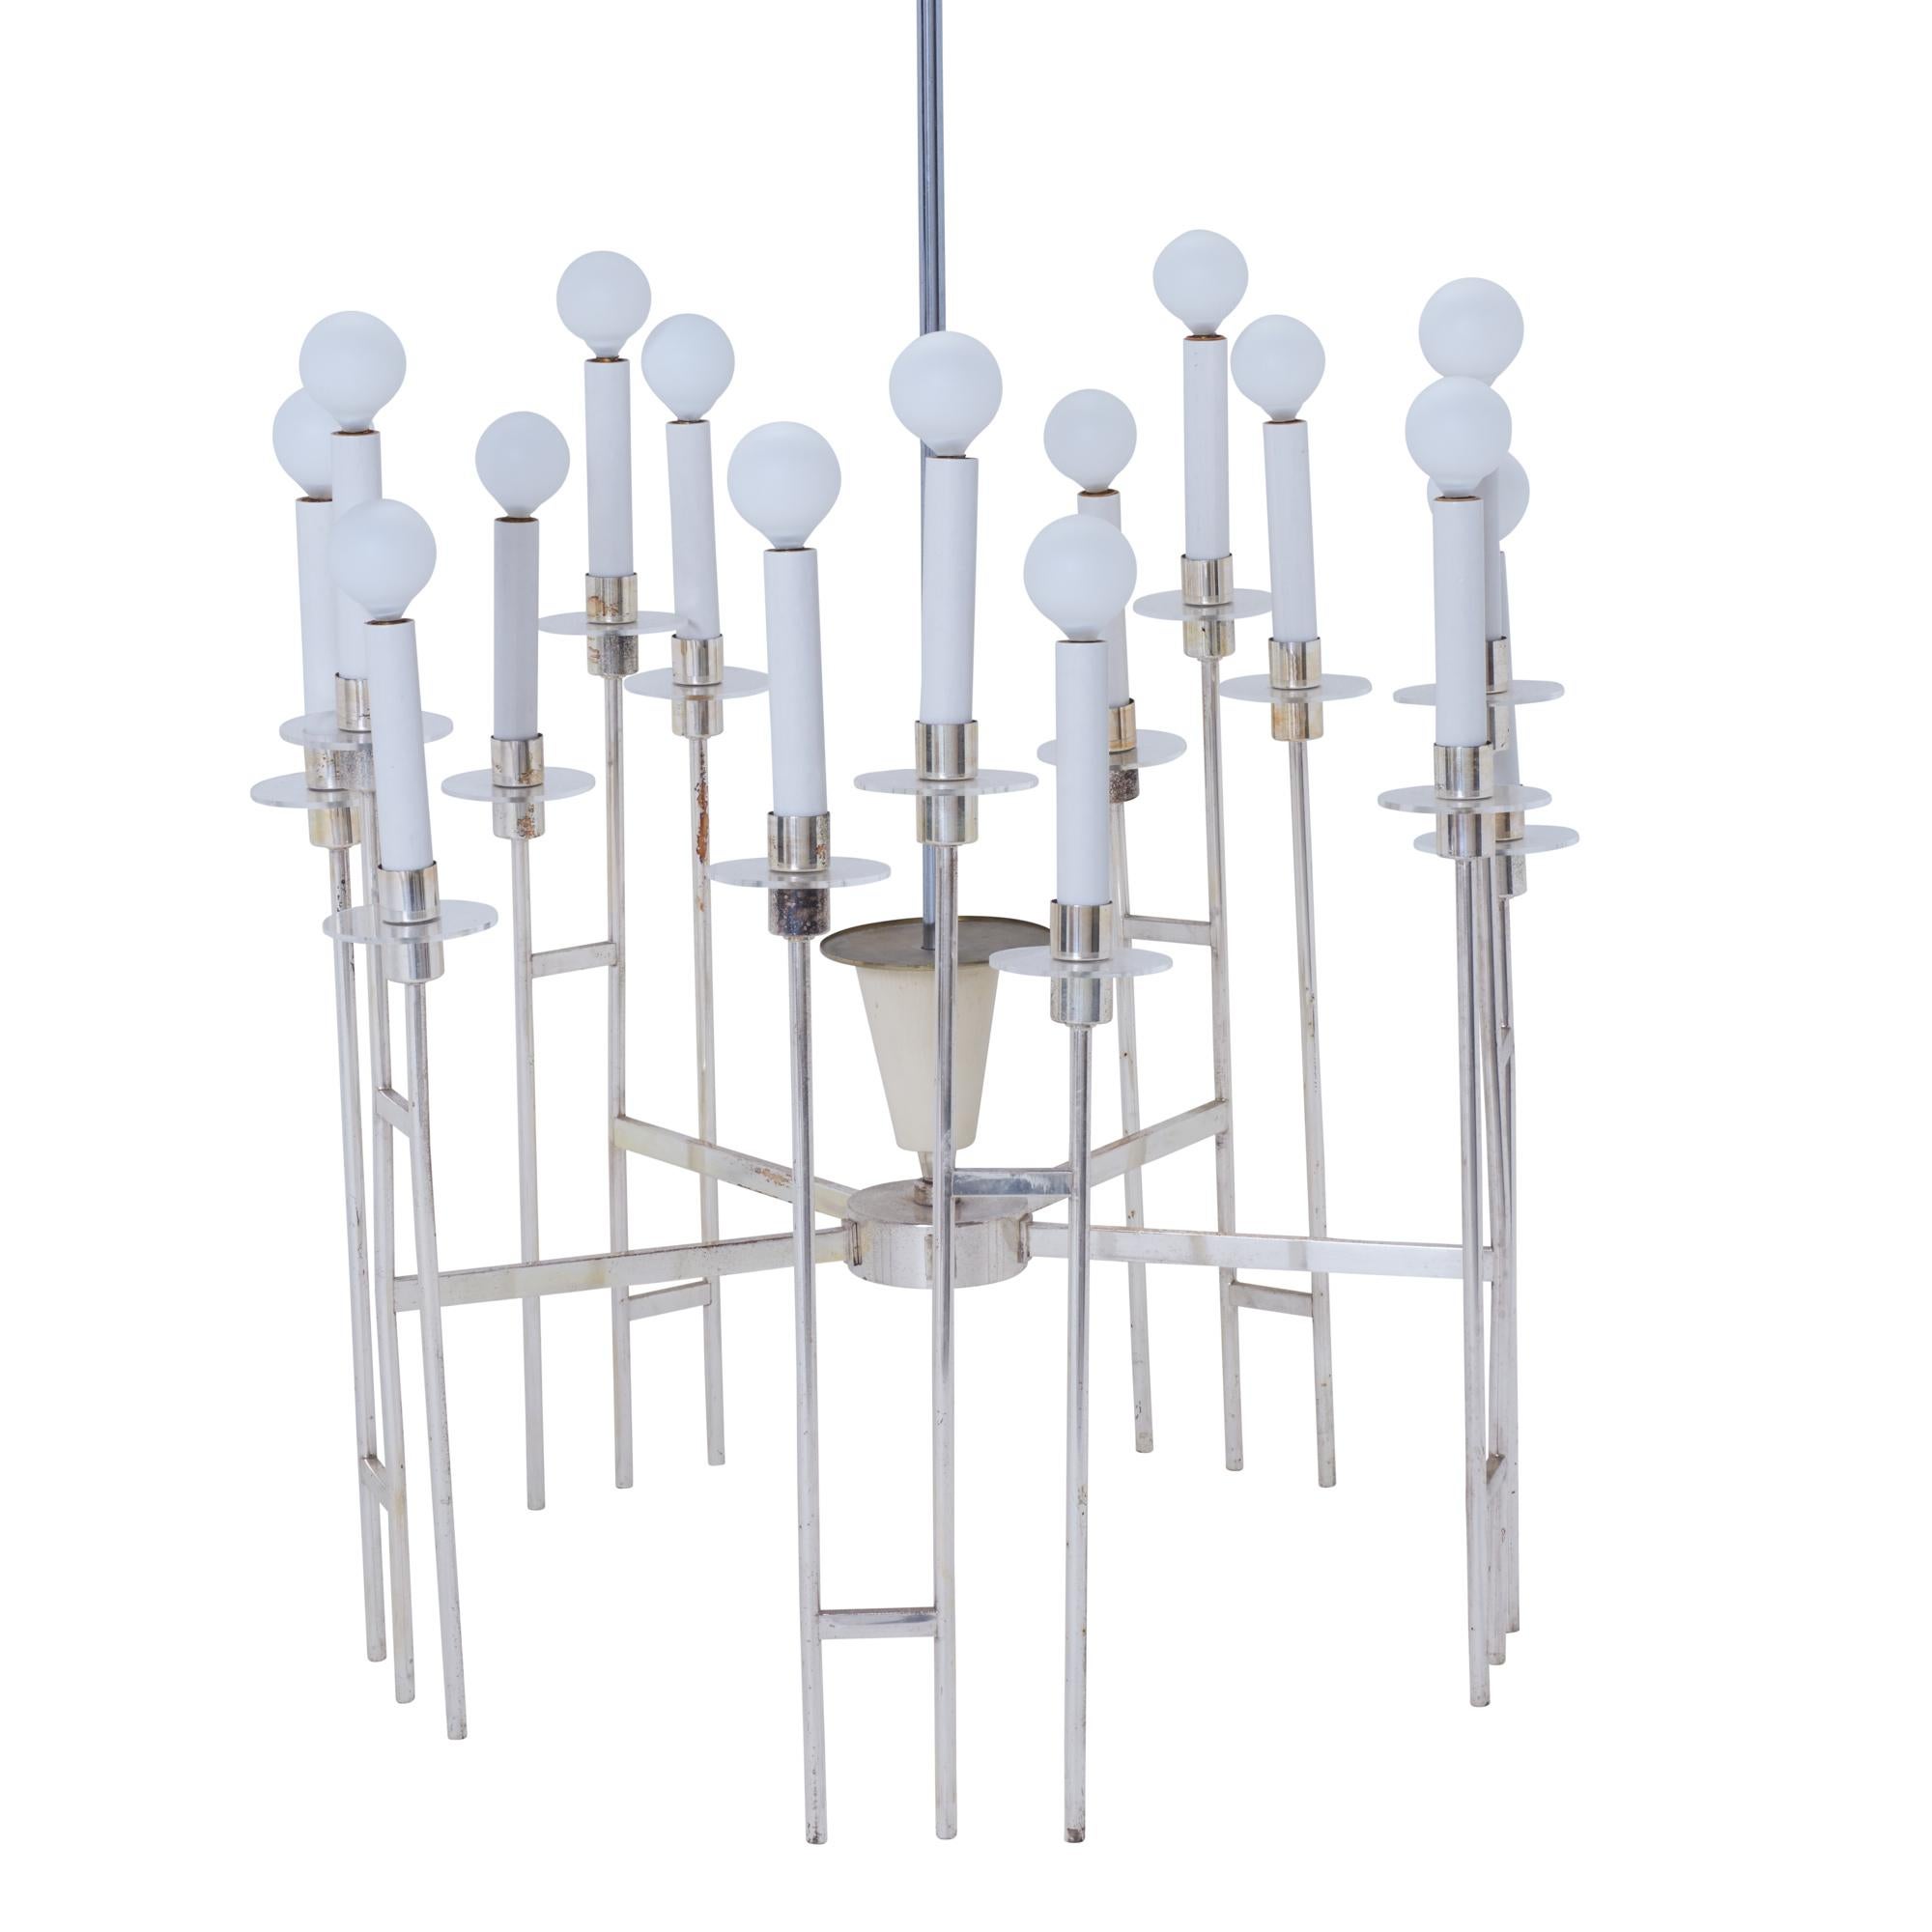 This French midcentury chandelier will surely brighten any room with its lovely chrome and candle-inspired light sockets.

Since Schumacher was founded in 1889, our family-owned company has been synonymous with style, taste, and innovation. A